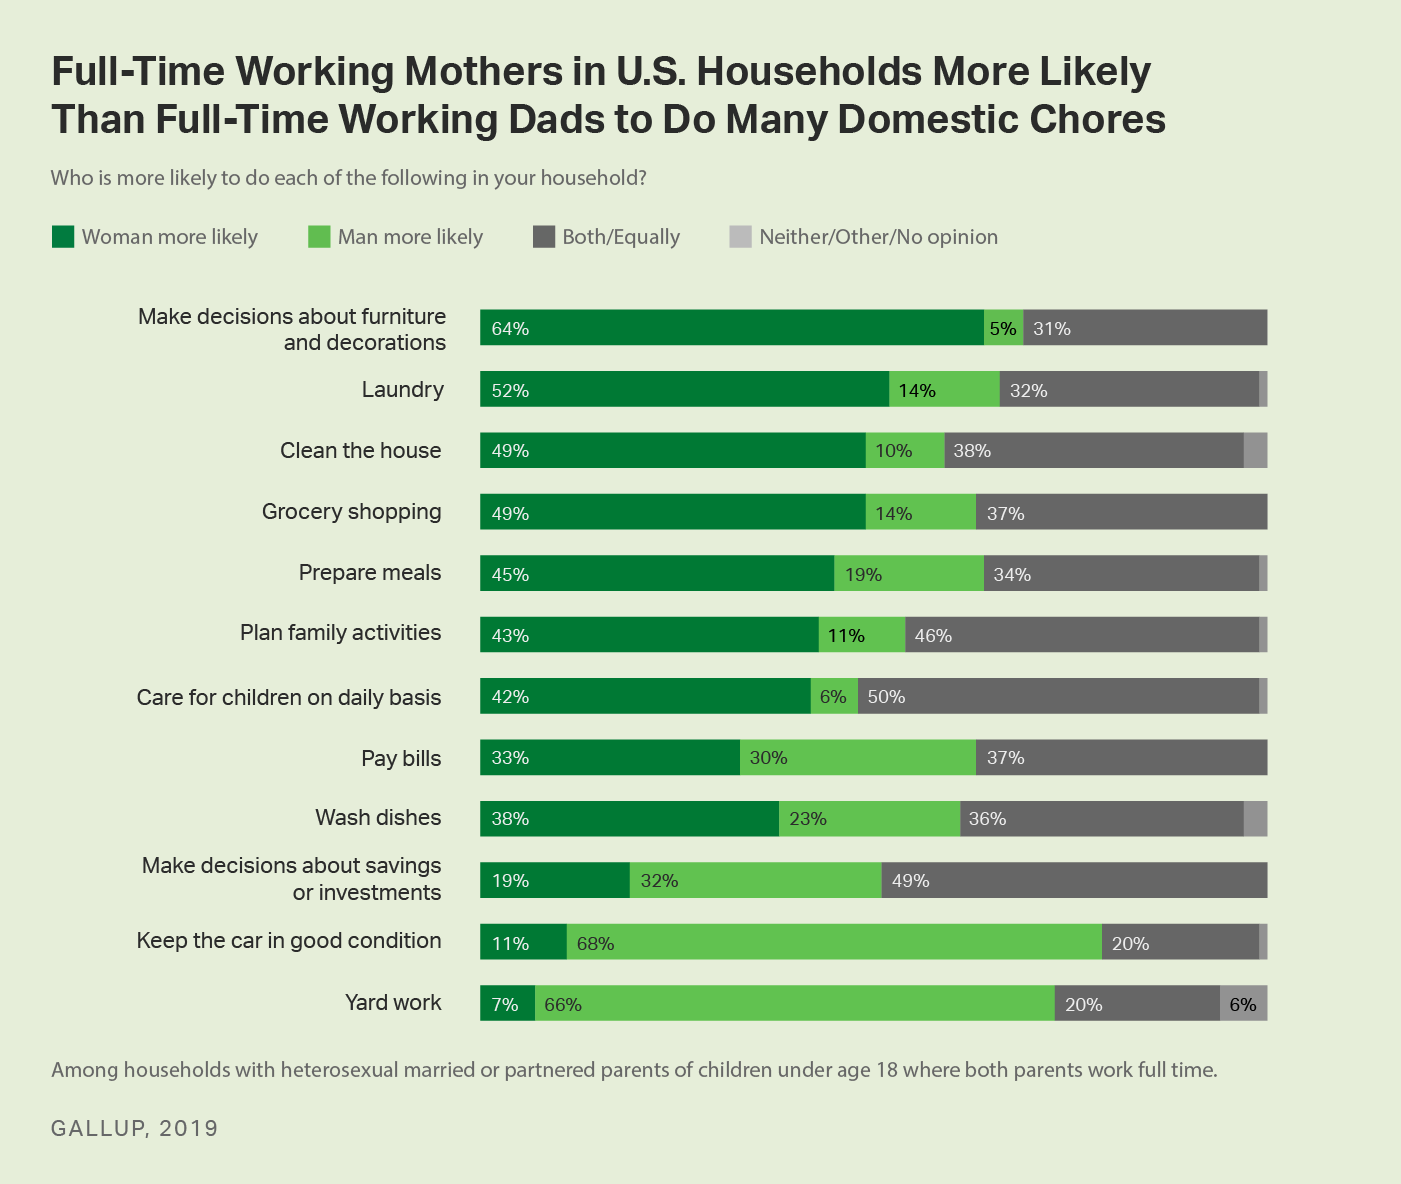 Bar chart. List of 12 household chores and who is most likely to do each in homes where both parents work full time.